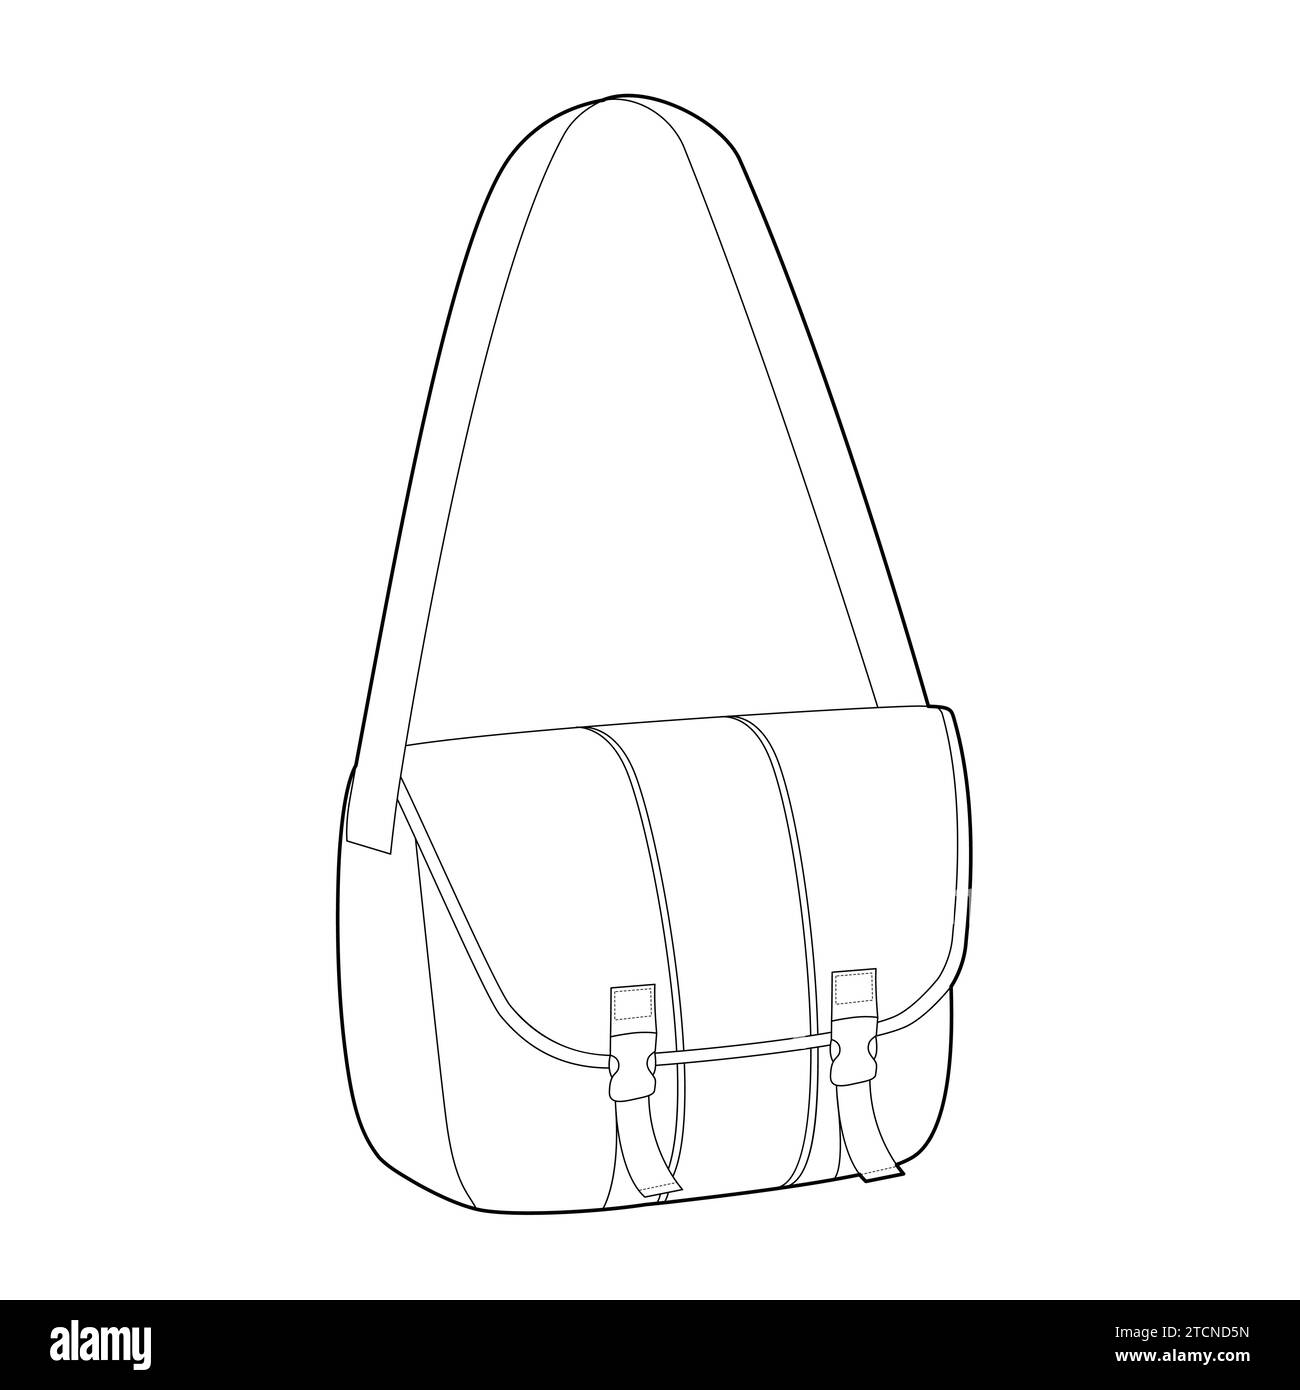 Courier Carryall Messenger Bag. Fashion accessory technical illustration. Vector satchel front 3-4 view for Men, women, unisex style, flat handbag CAD mockup sketch outline isolated Stock Vector